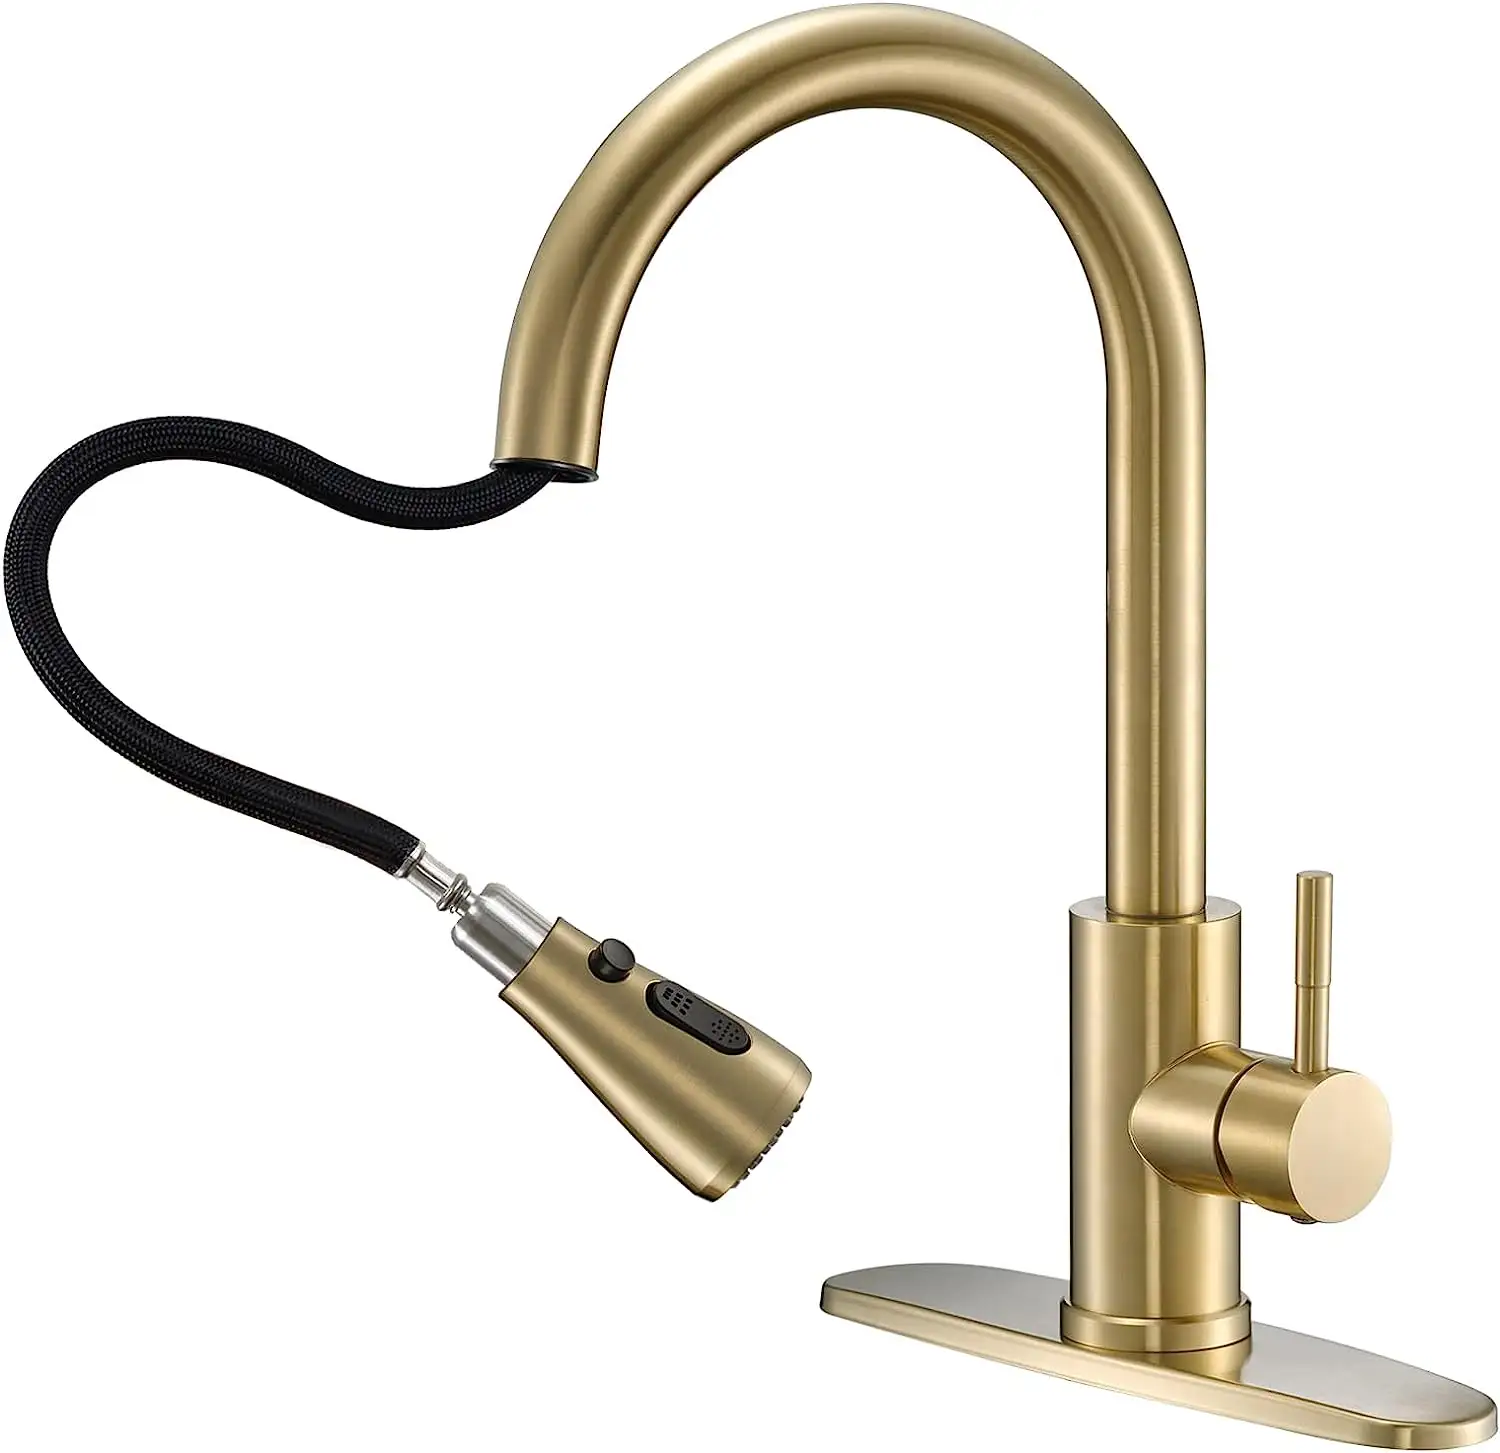 Commercial kitchen sink faucet with high curved single handle gold pull-down kitchen sink faucet with pull-out spray